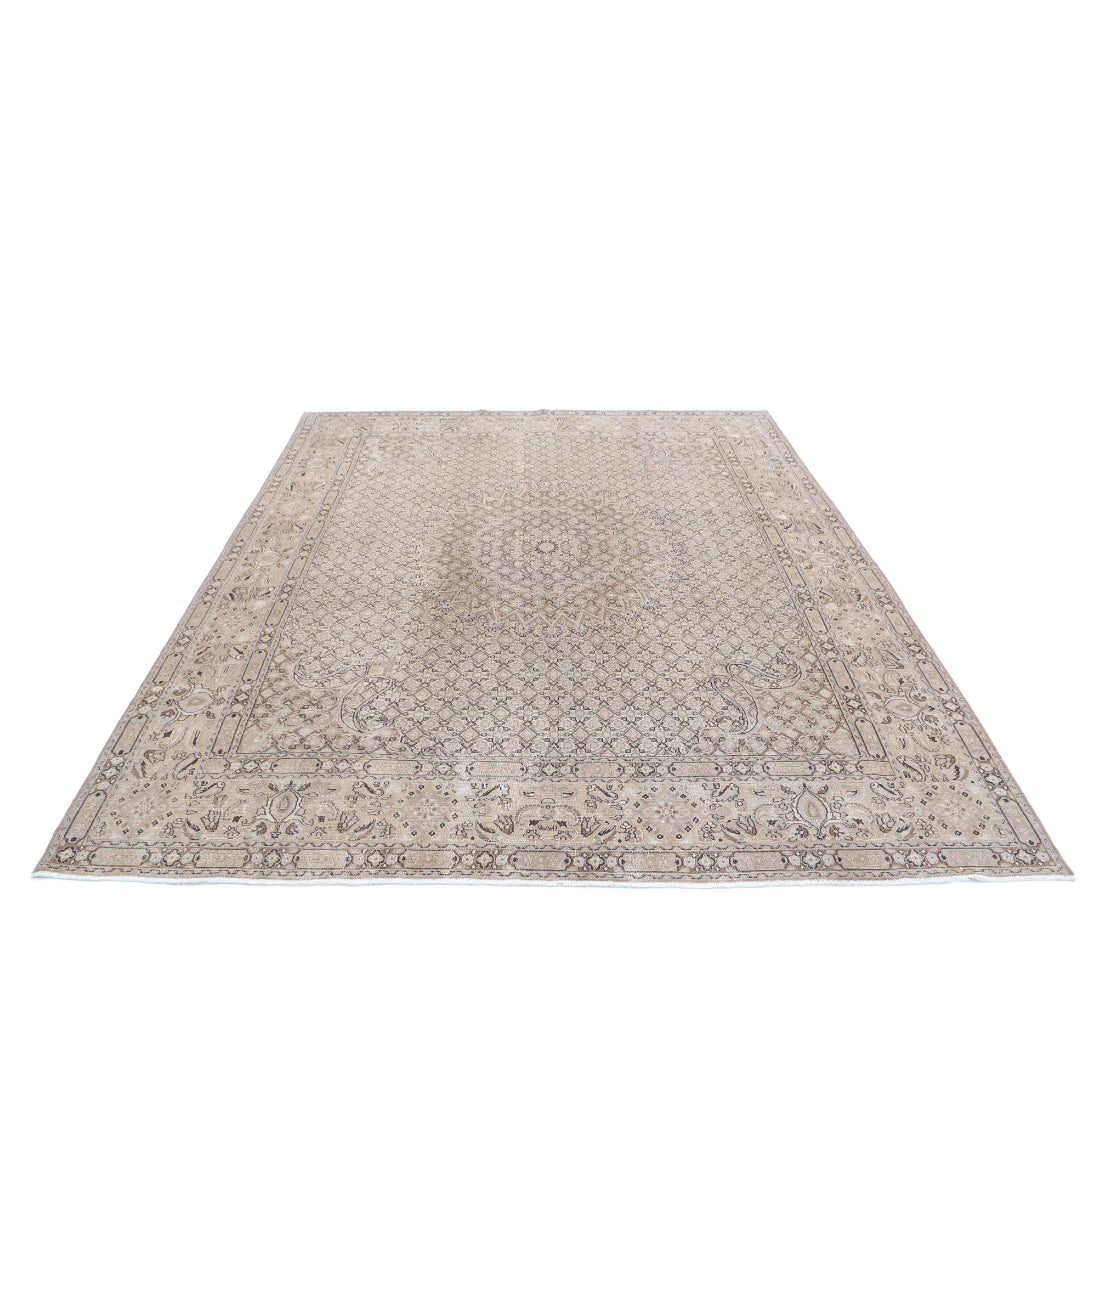 Hand Knotted Vintage Persian Bijar Wool Rug - 7'9'' x 9'7'' 7'9'' x 9'7'' (233 X 288) / Taupe / Brown